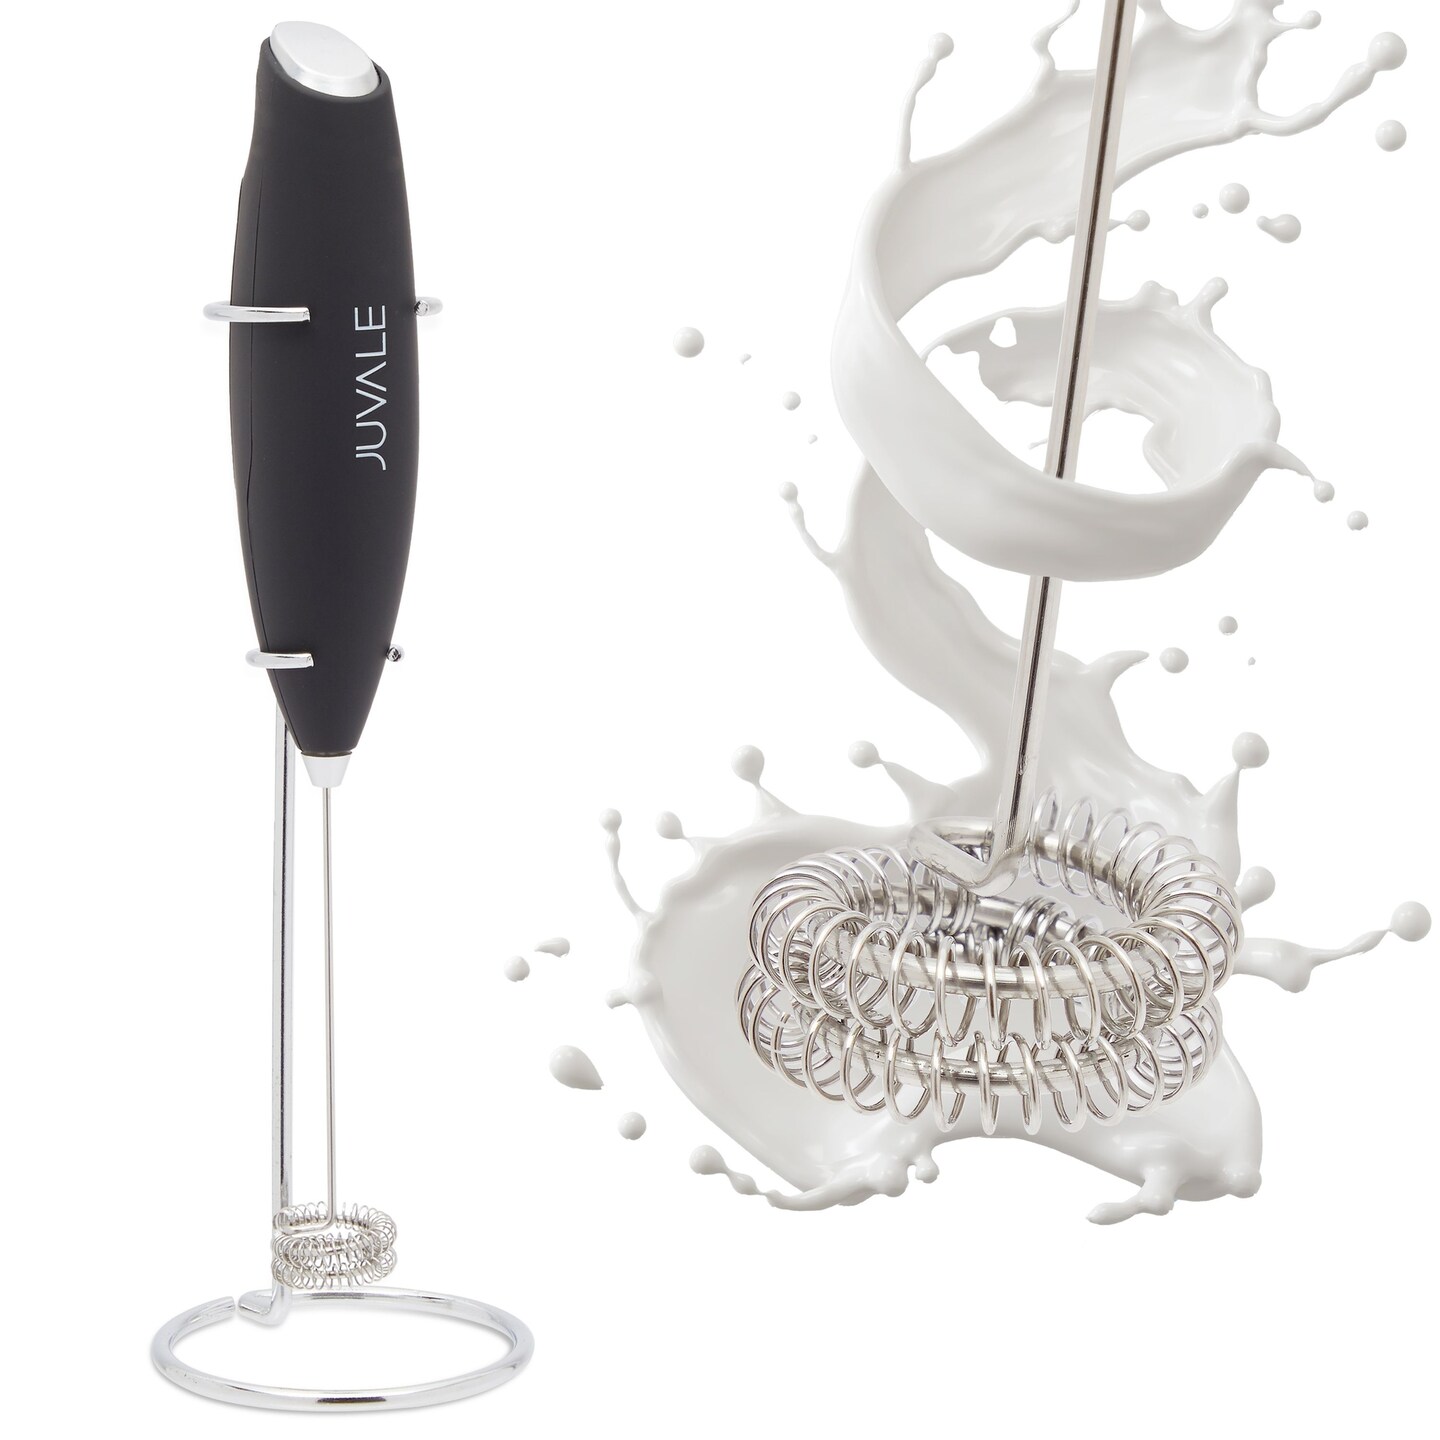 Hand Held Electric Milk Frother